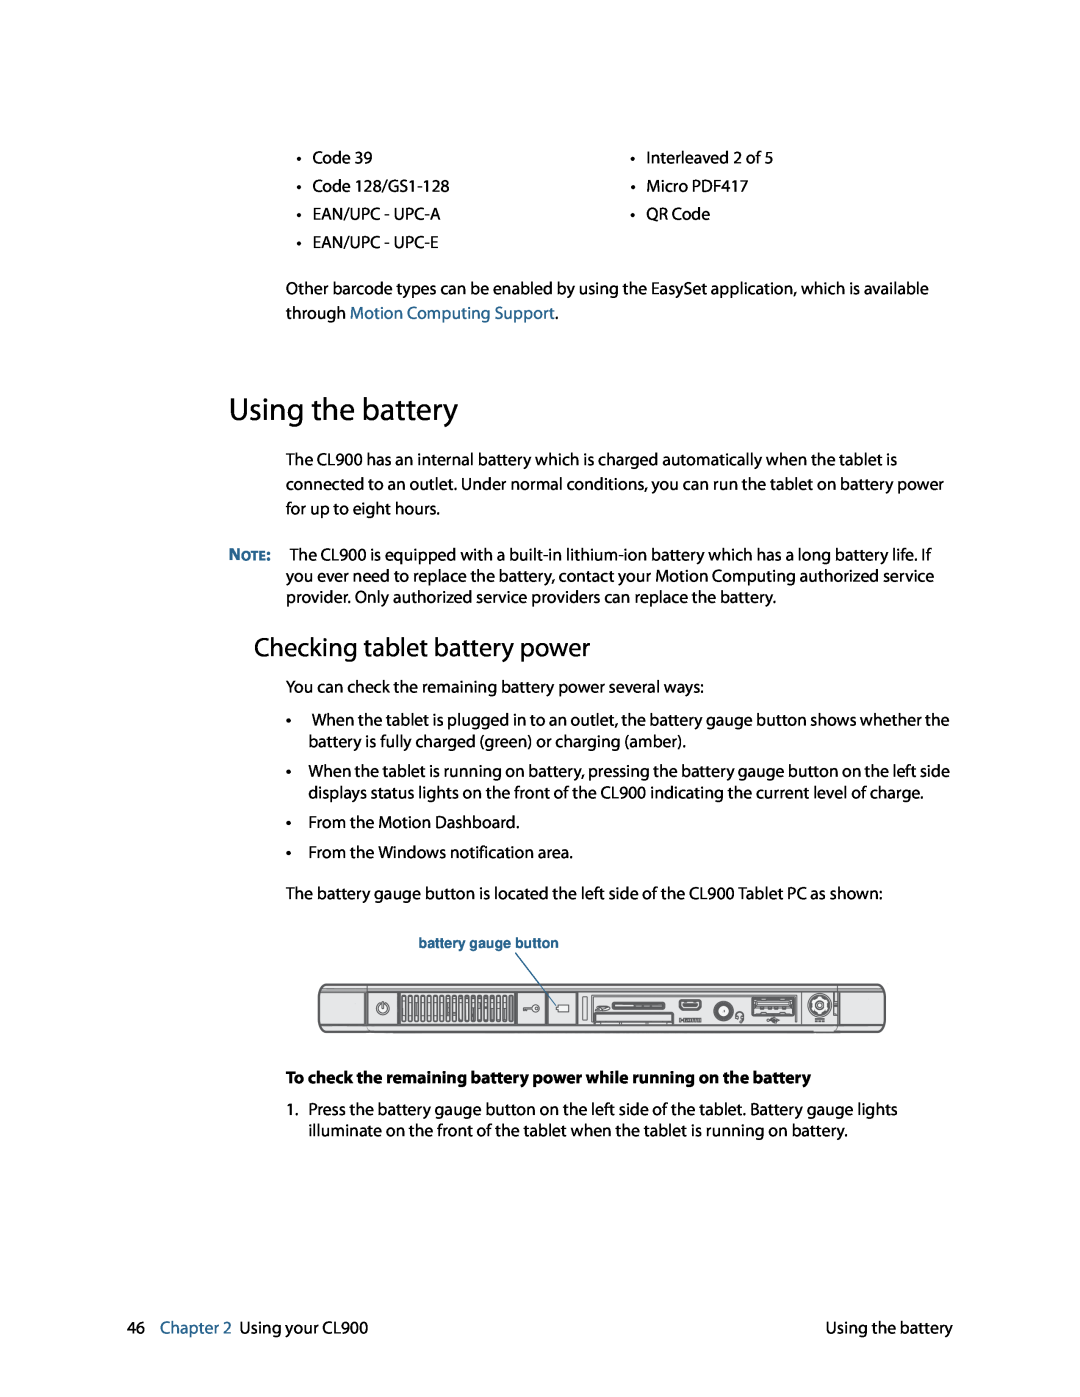 Motion FWS-001 manual Using the battery, Checking tablet battery power 